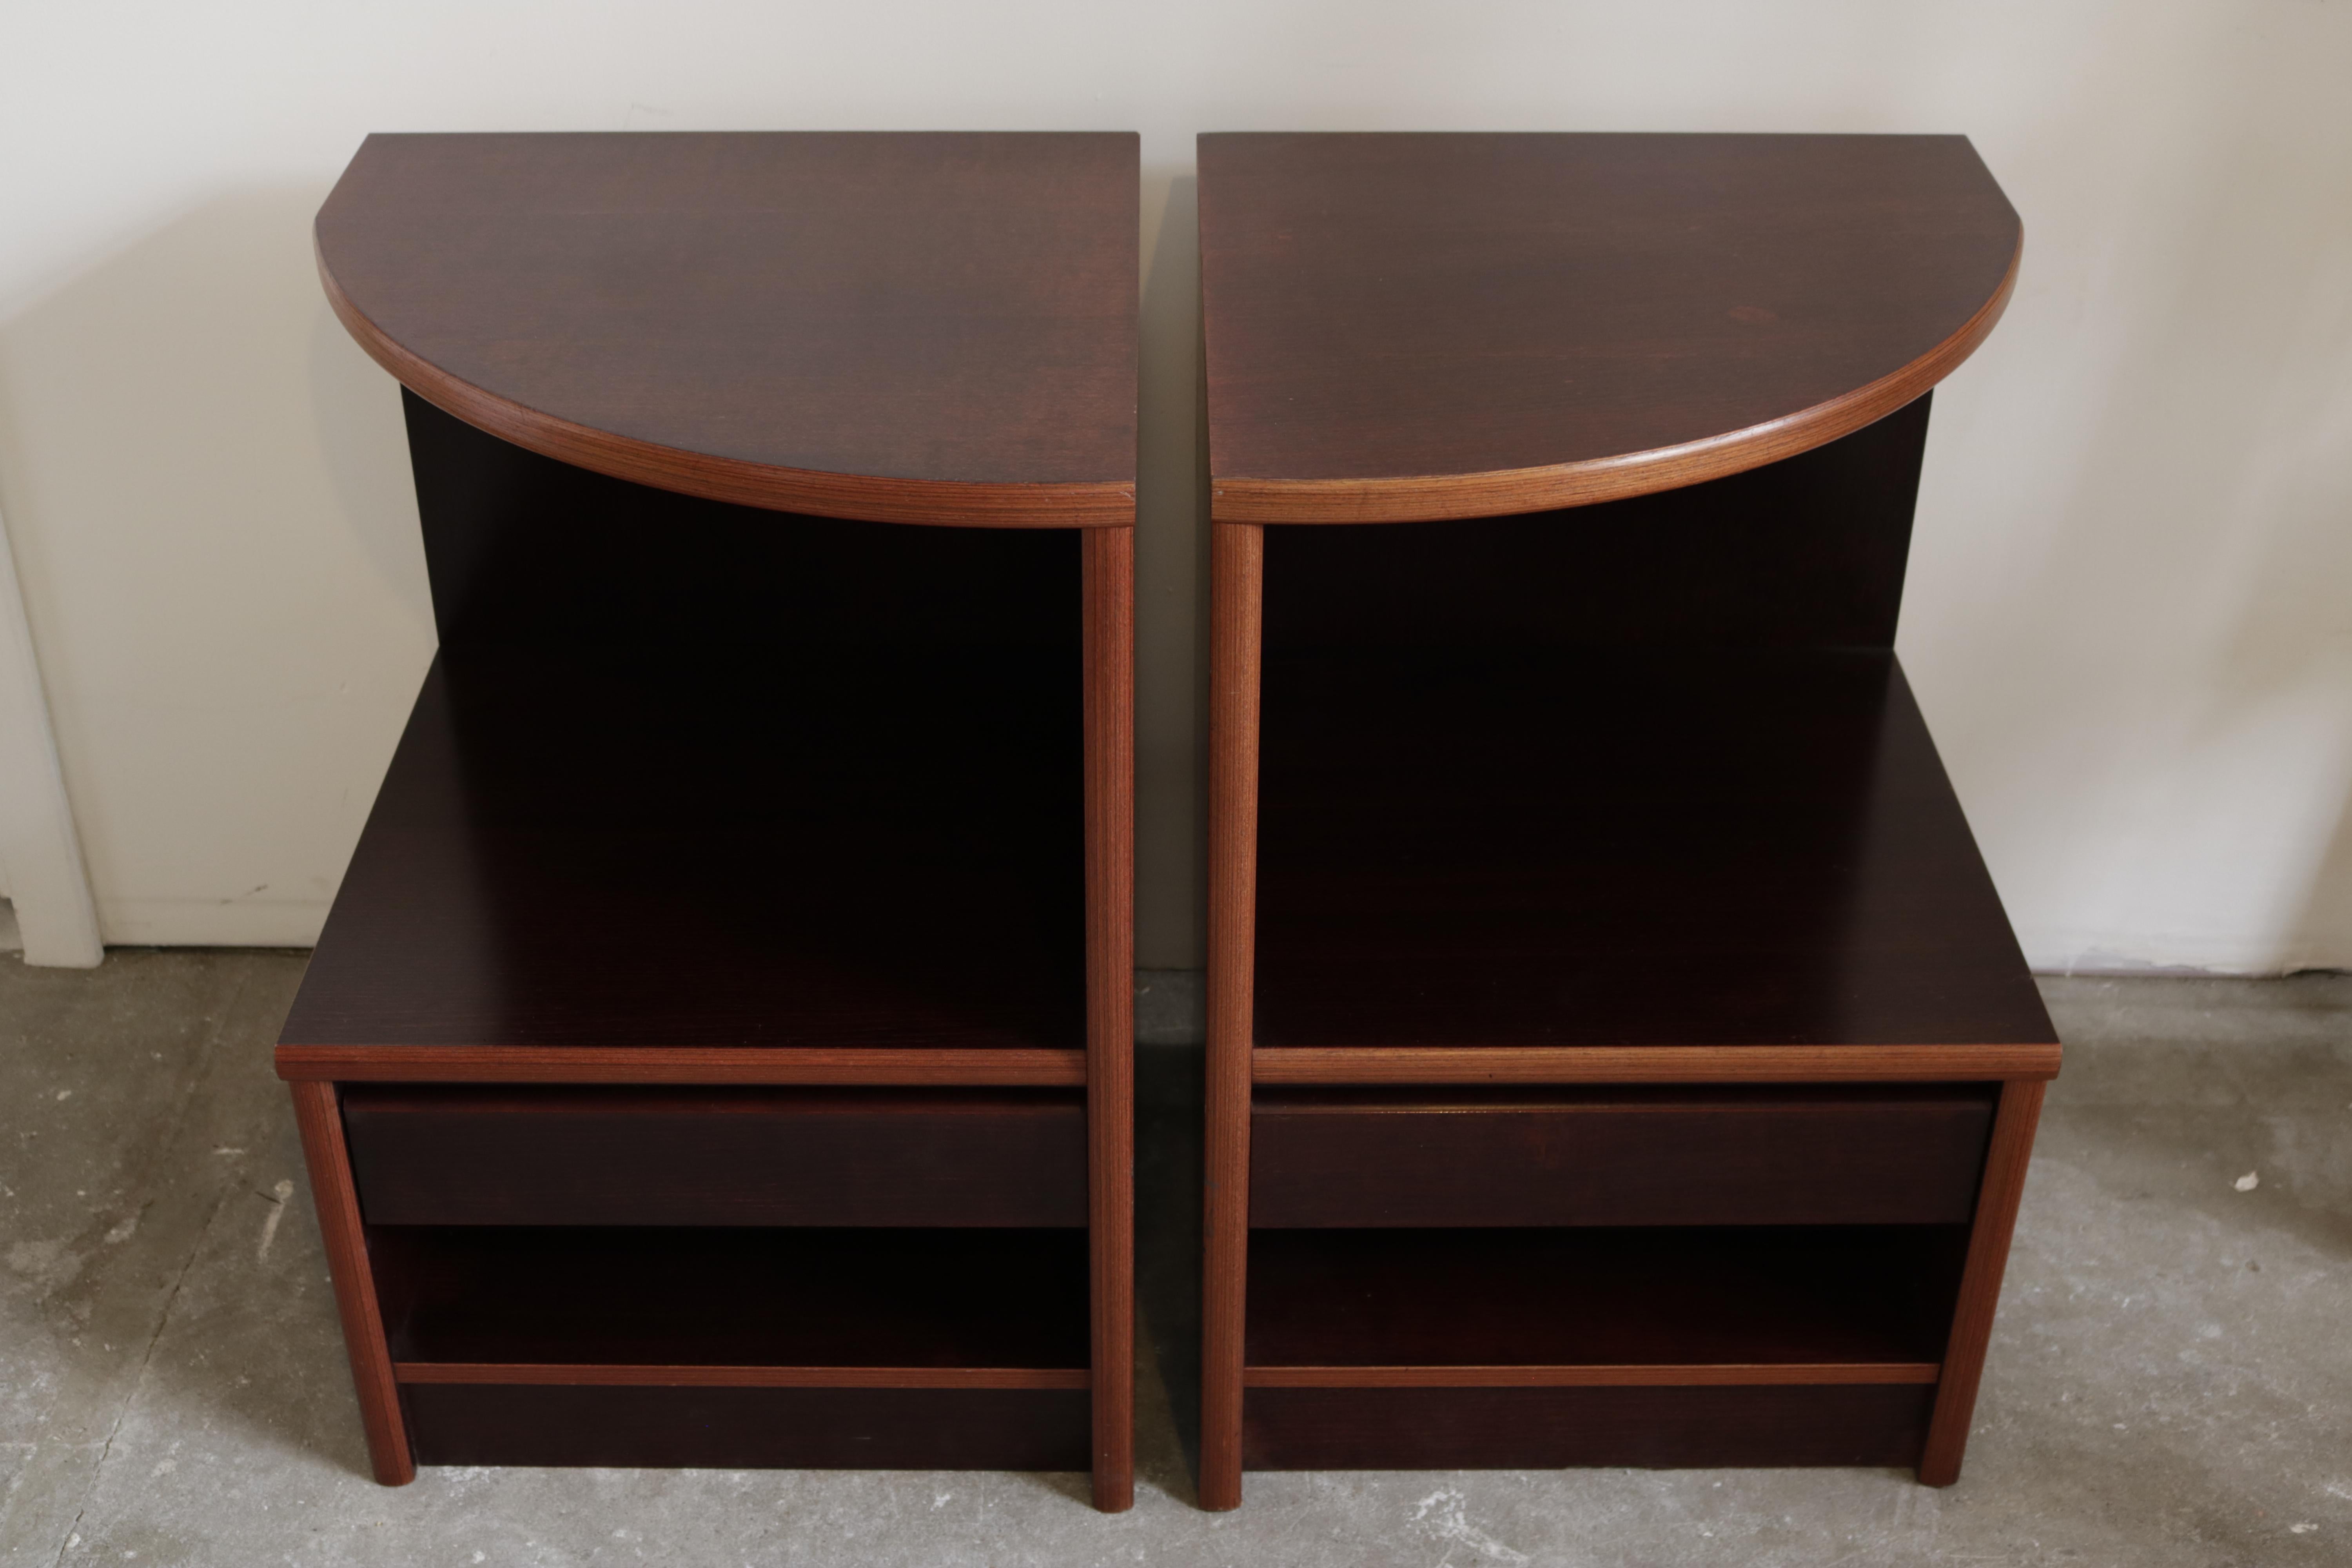 This pair of asymmetrical nightstands features one drawer and a shelf under it.
They are made of dark mahogany with lighter mahogany trims.